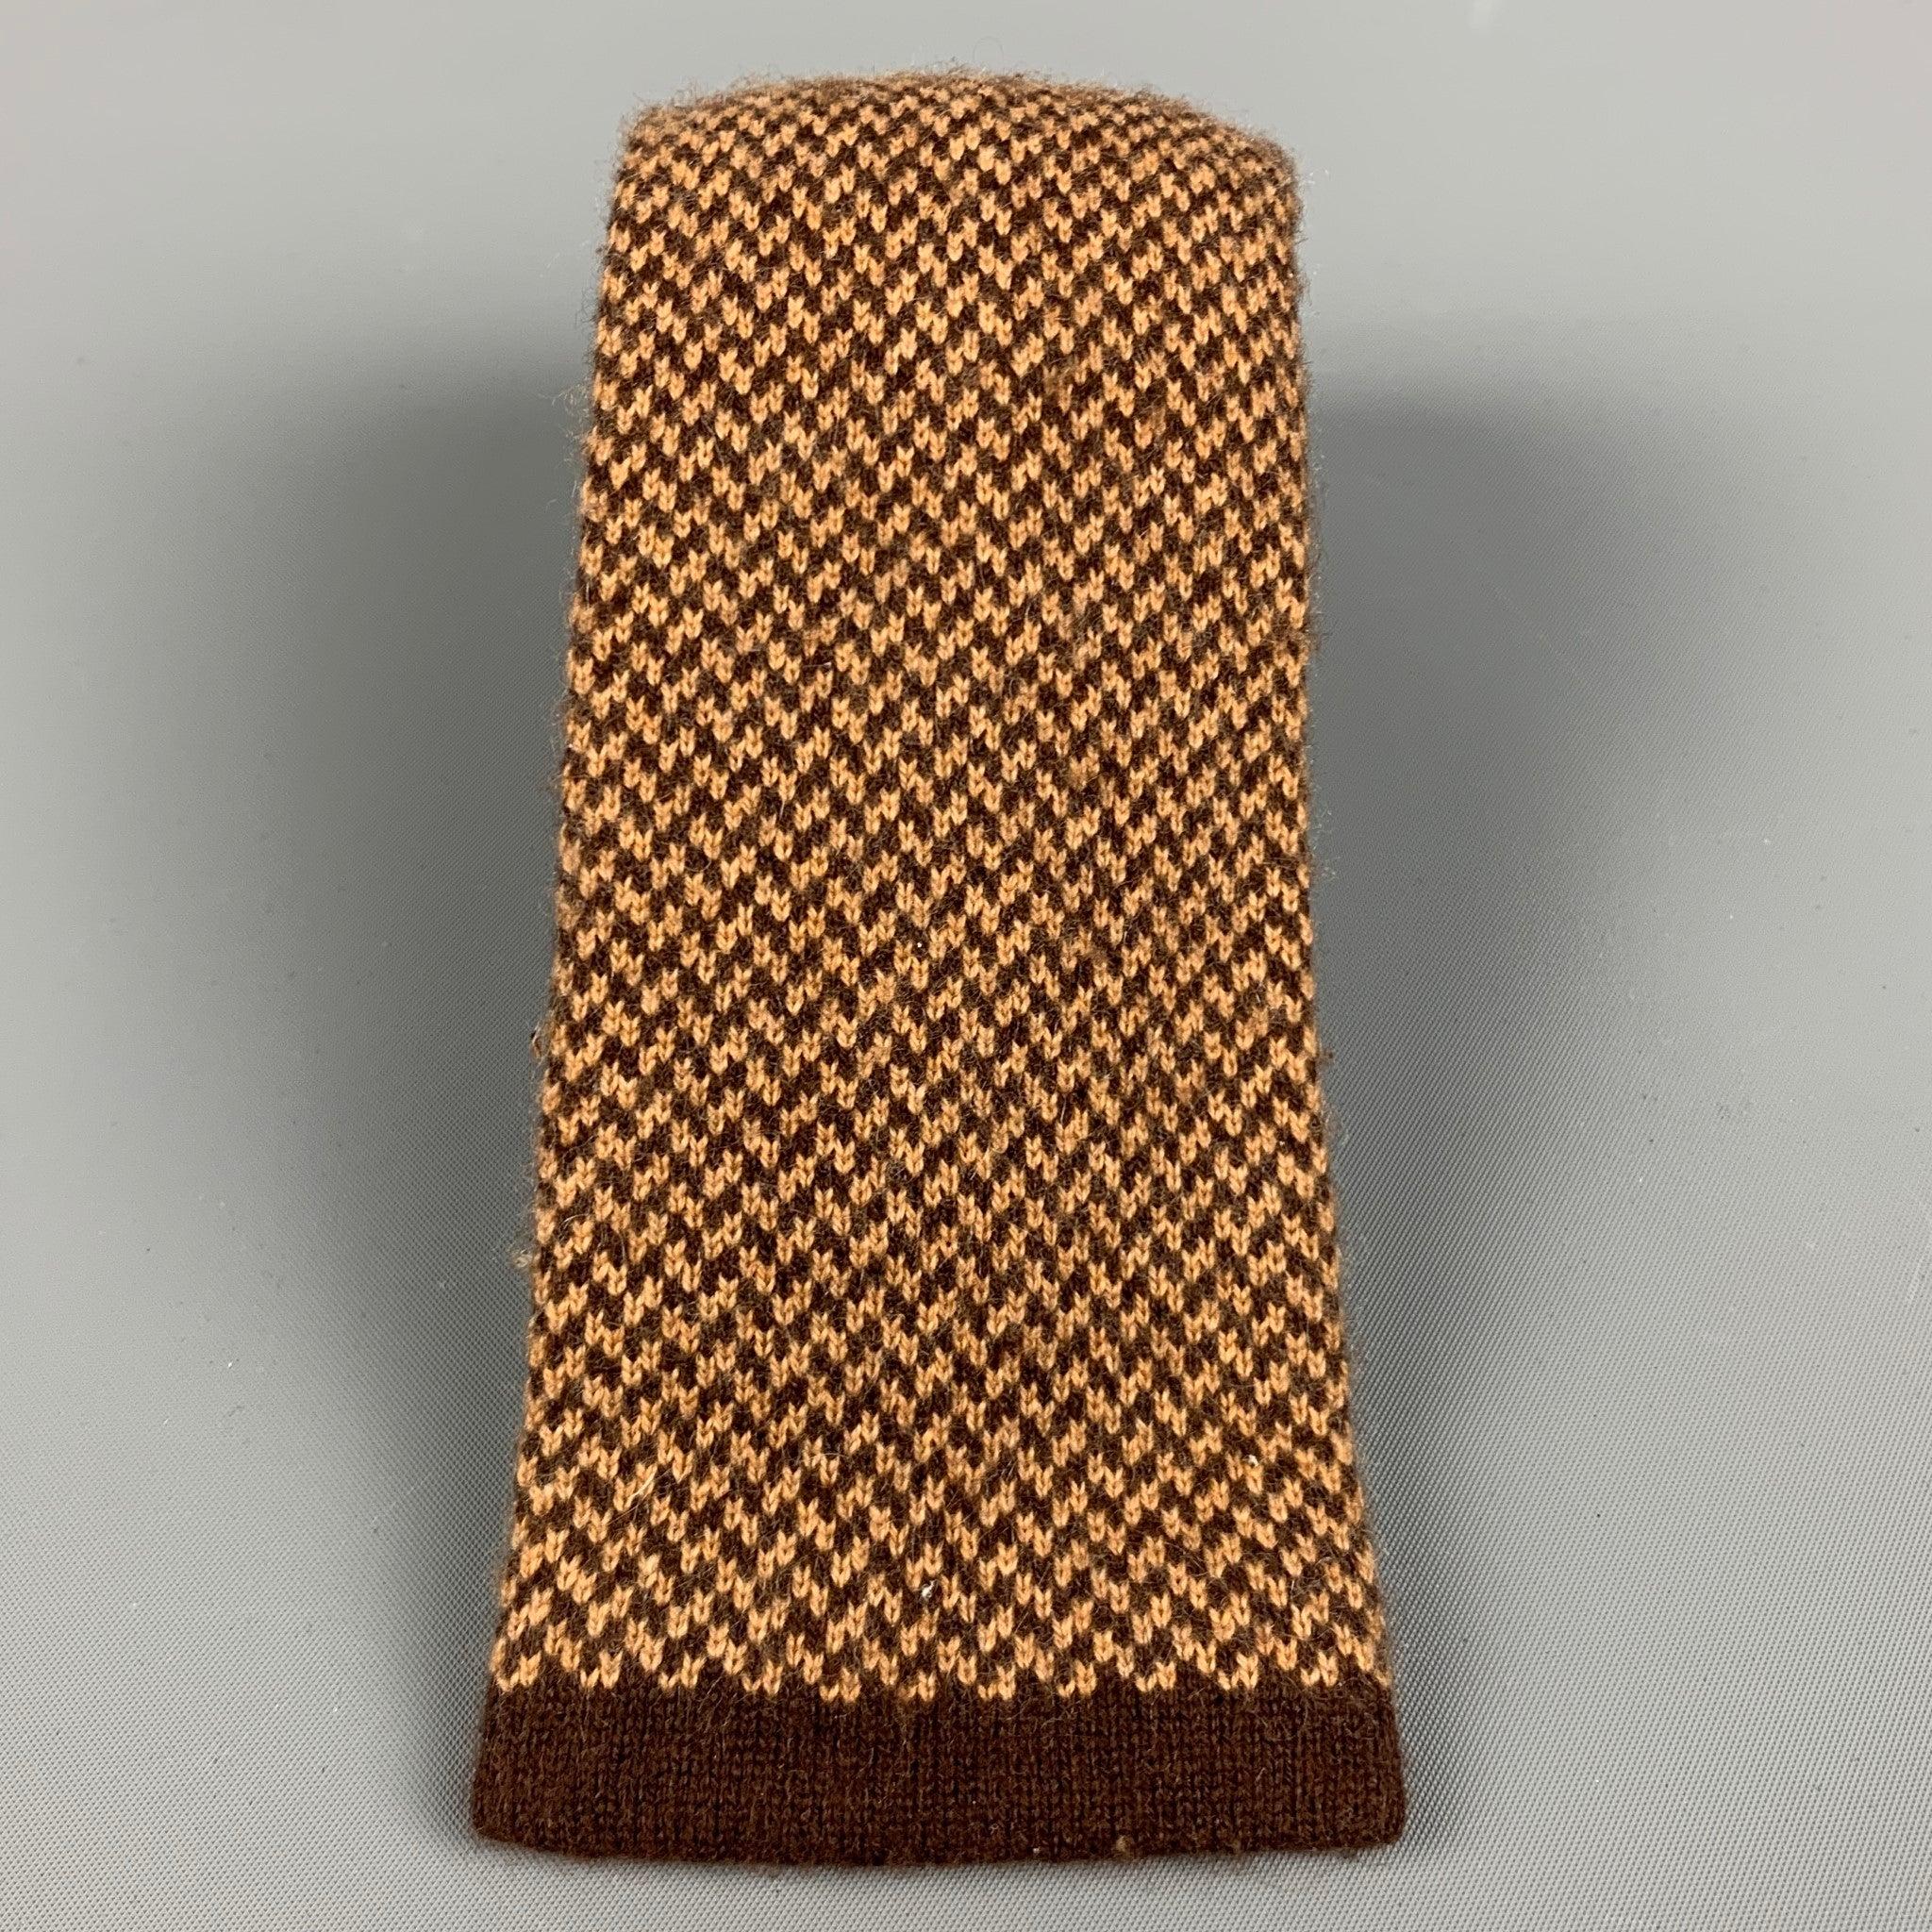 BERGDORF GOODMAN
necktie in a
brown and beige cashmere weave featuring a skinny square fit. Made in Italy.Excellent Pre-Owned Condition. 

Measurements: 
  Width: 3 inches Length: 56 inches 
  
  
 
Reference: 128000
Category: Tie
More Details
   